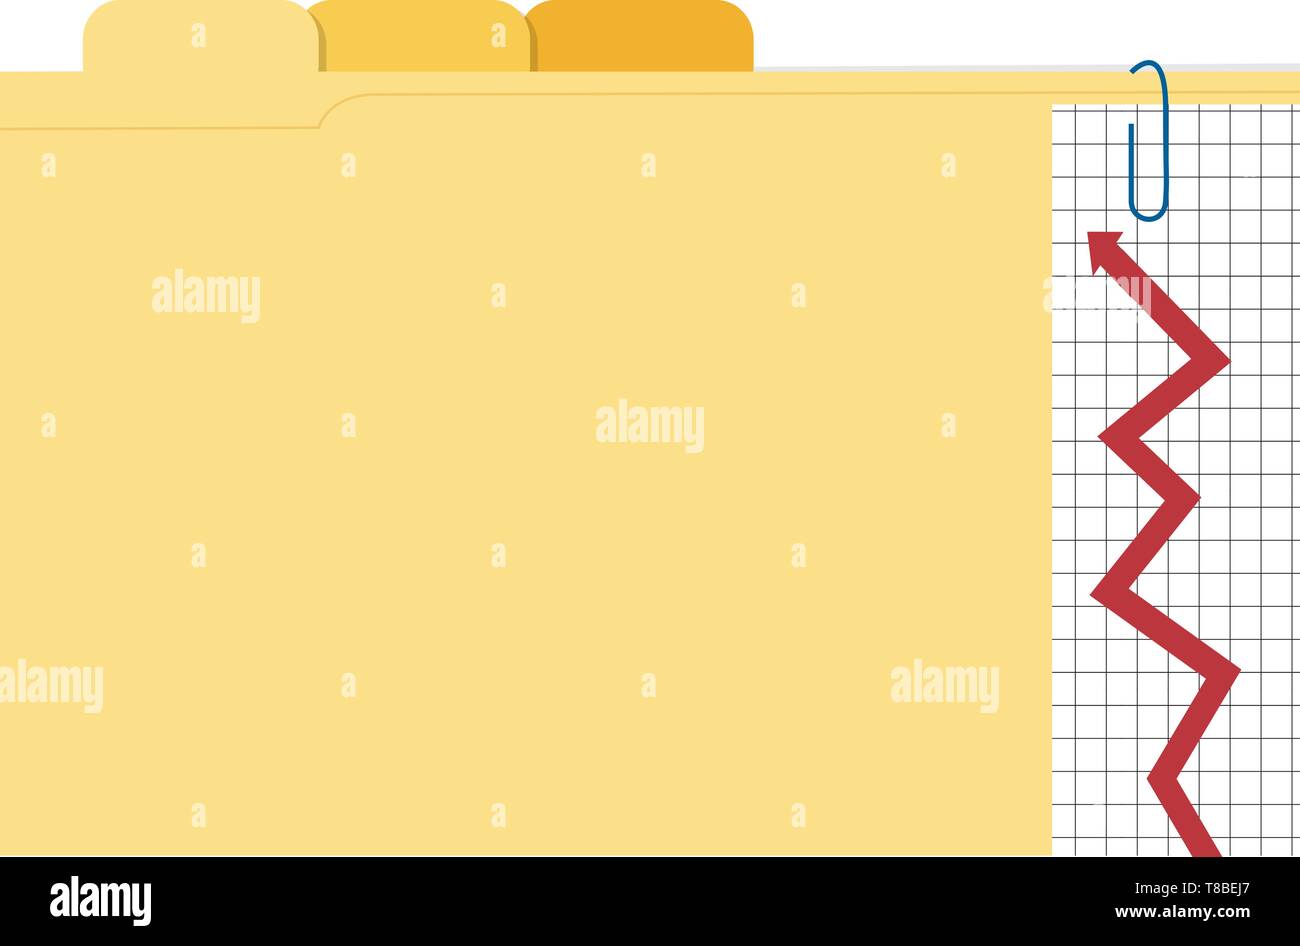 3 File Folders Trending Graph Paper-clipped Together Stock Vector